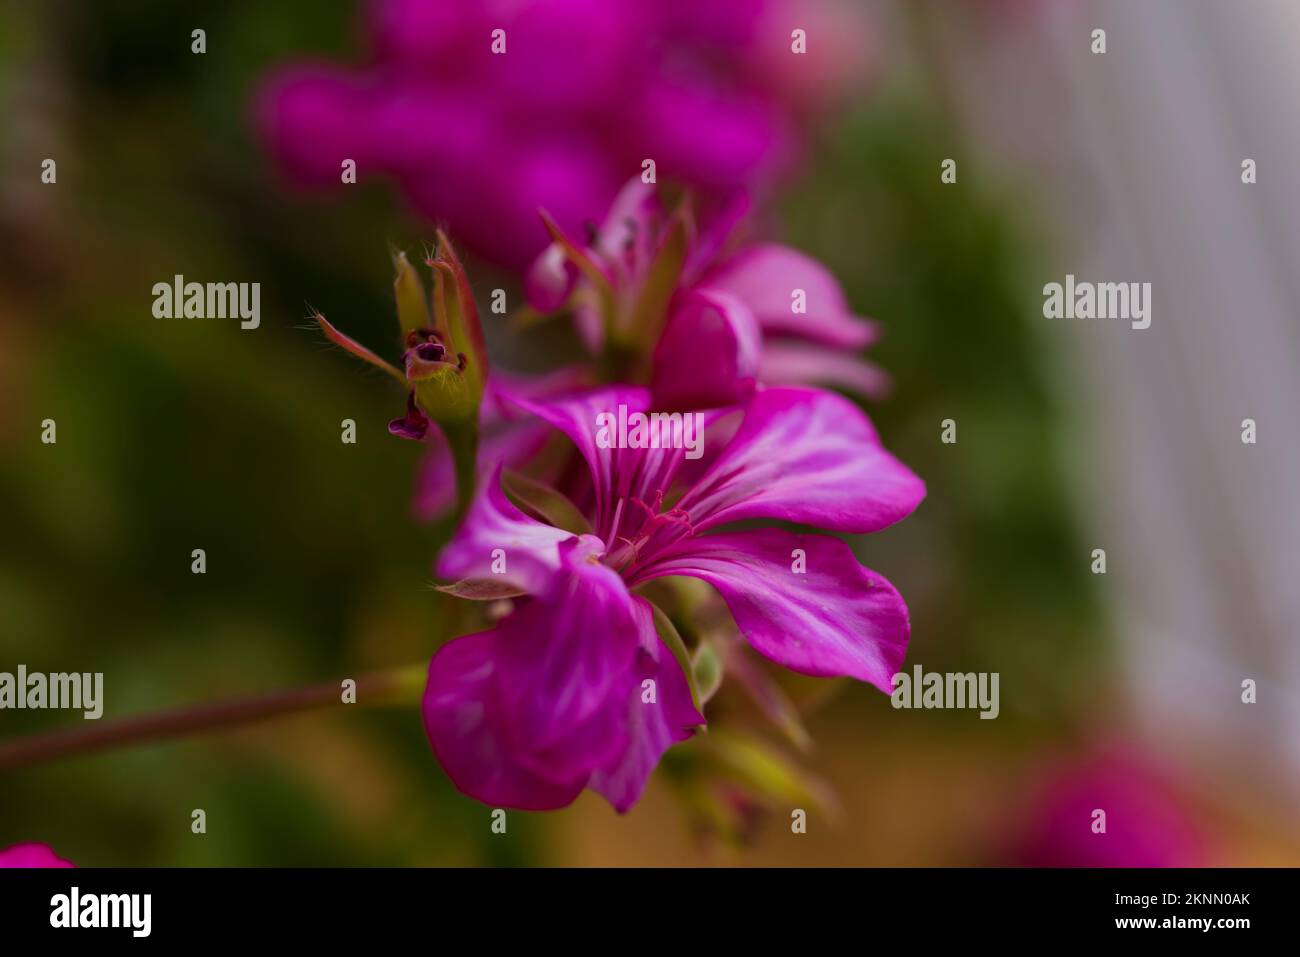 purple pink wildflowers on green background in nature flower photograph Stock Photo